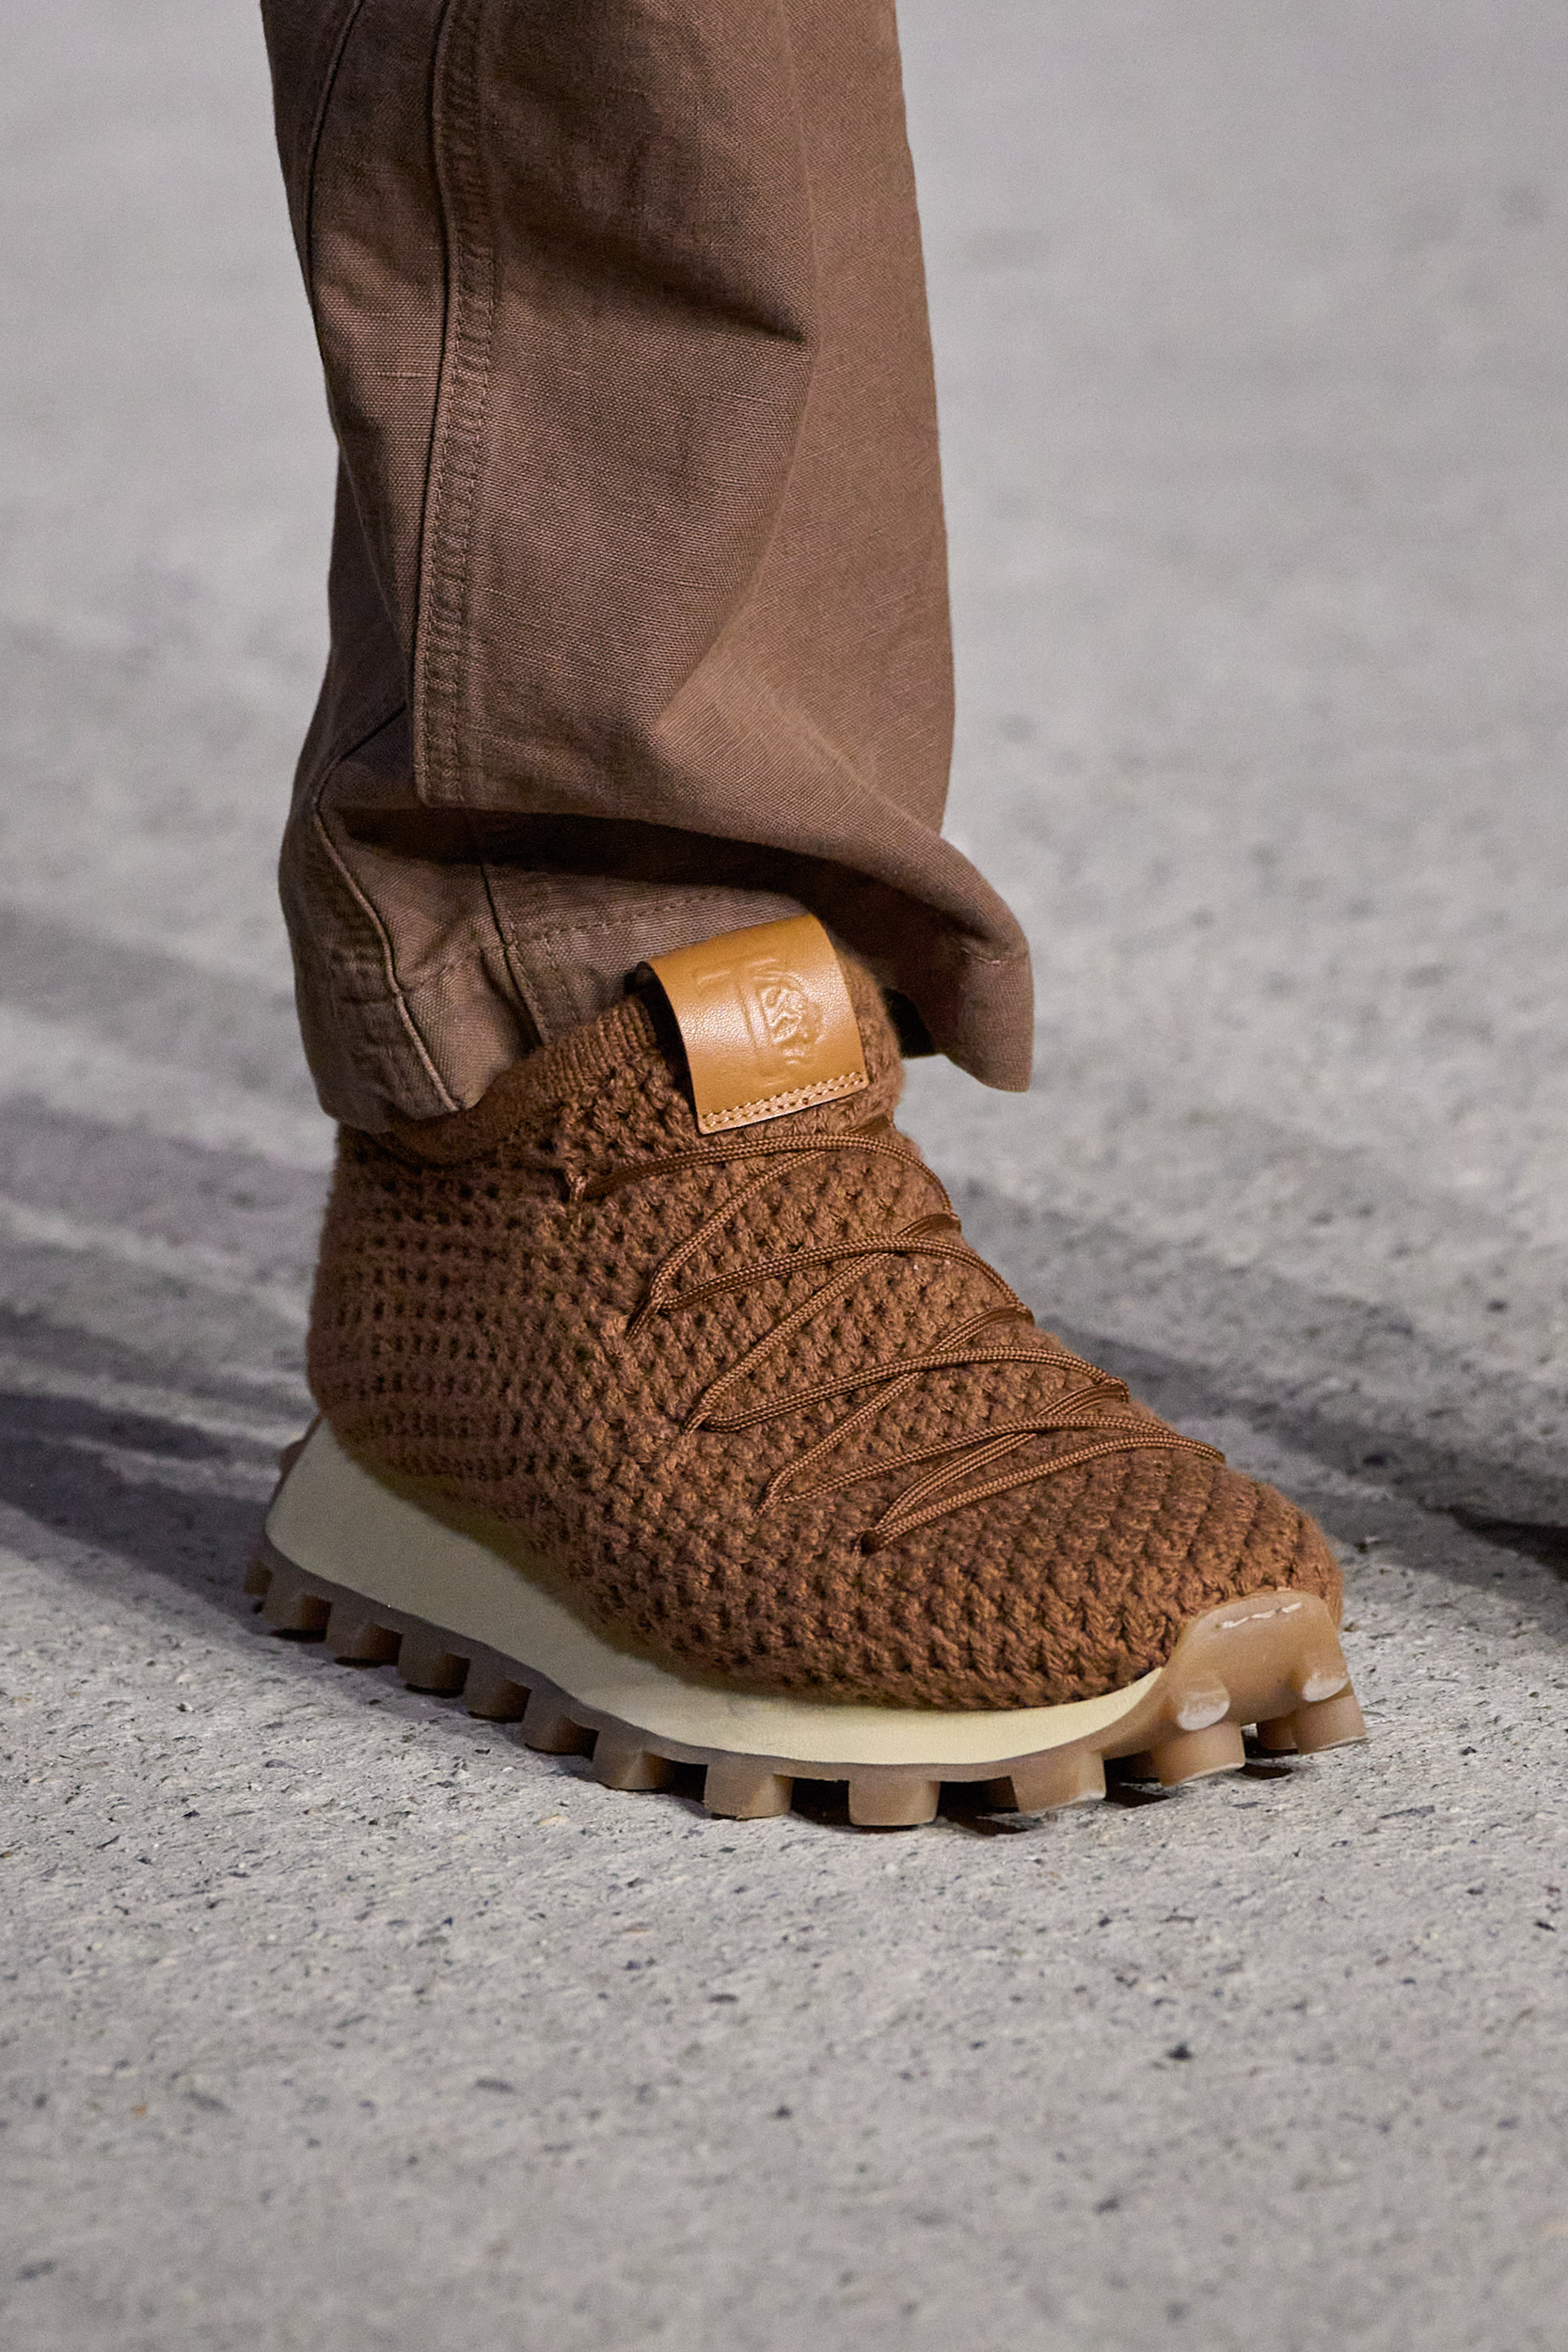 Tods  Spring 2023 Fashion Show Details